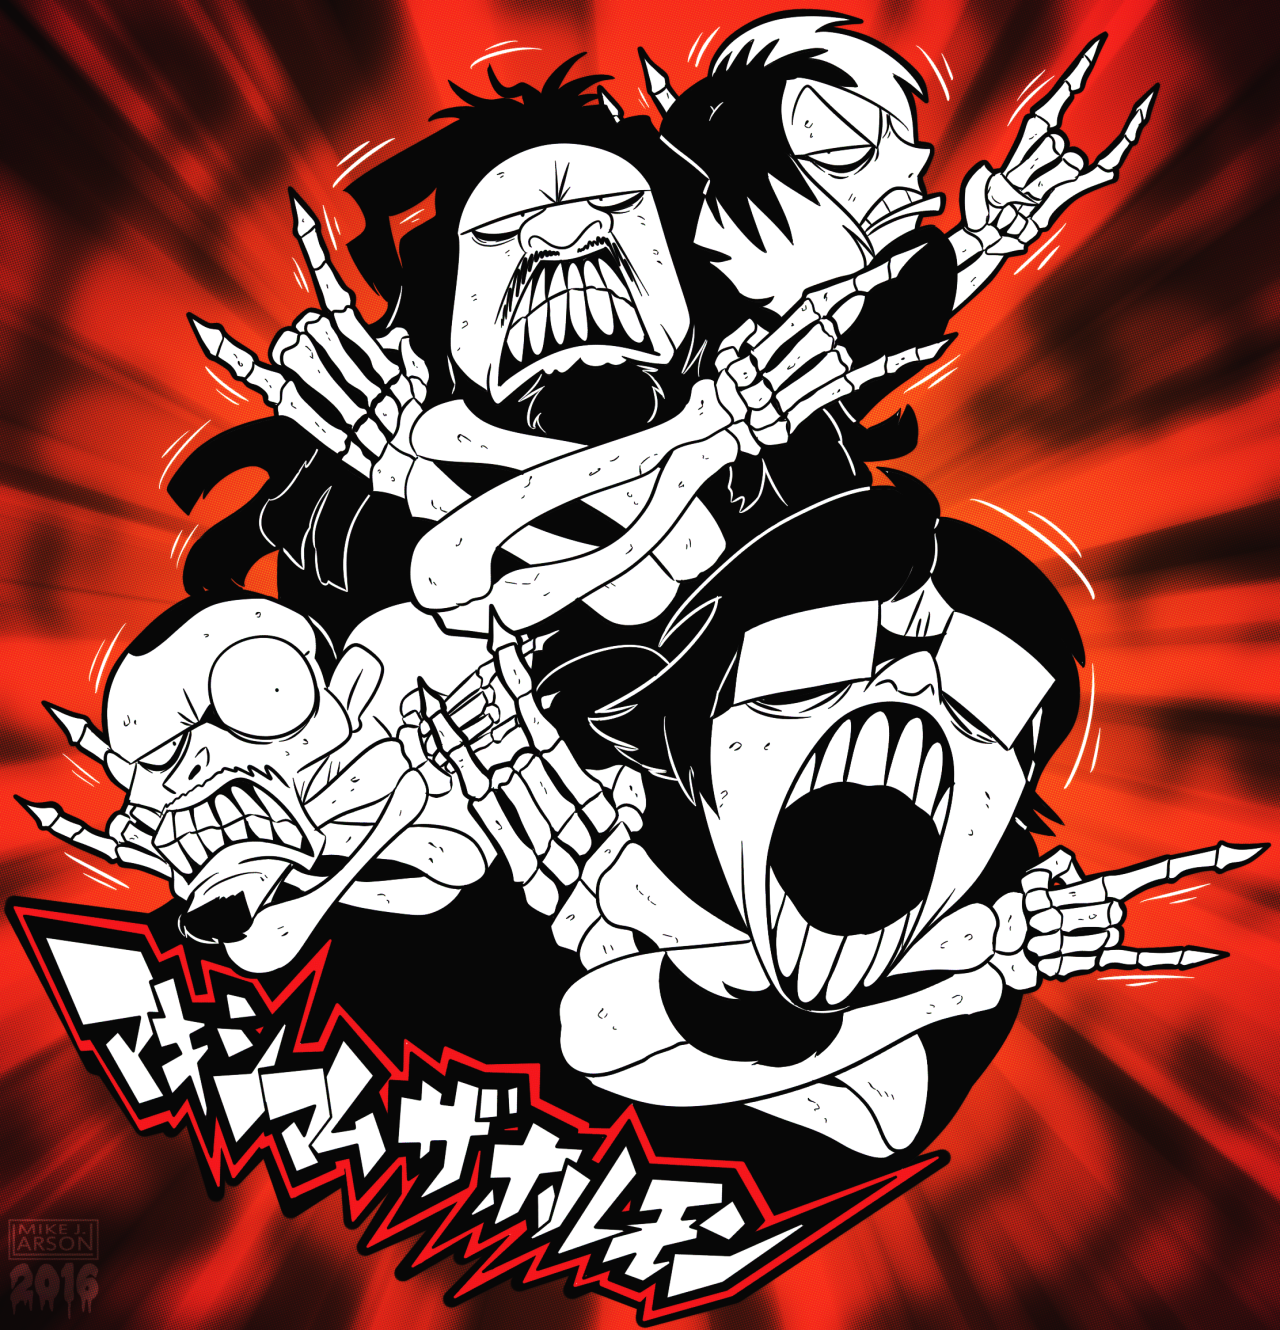 Wanted to make some fan art for one of my favorite bands, Maximum the Hormone&hellip;